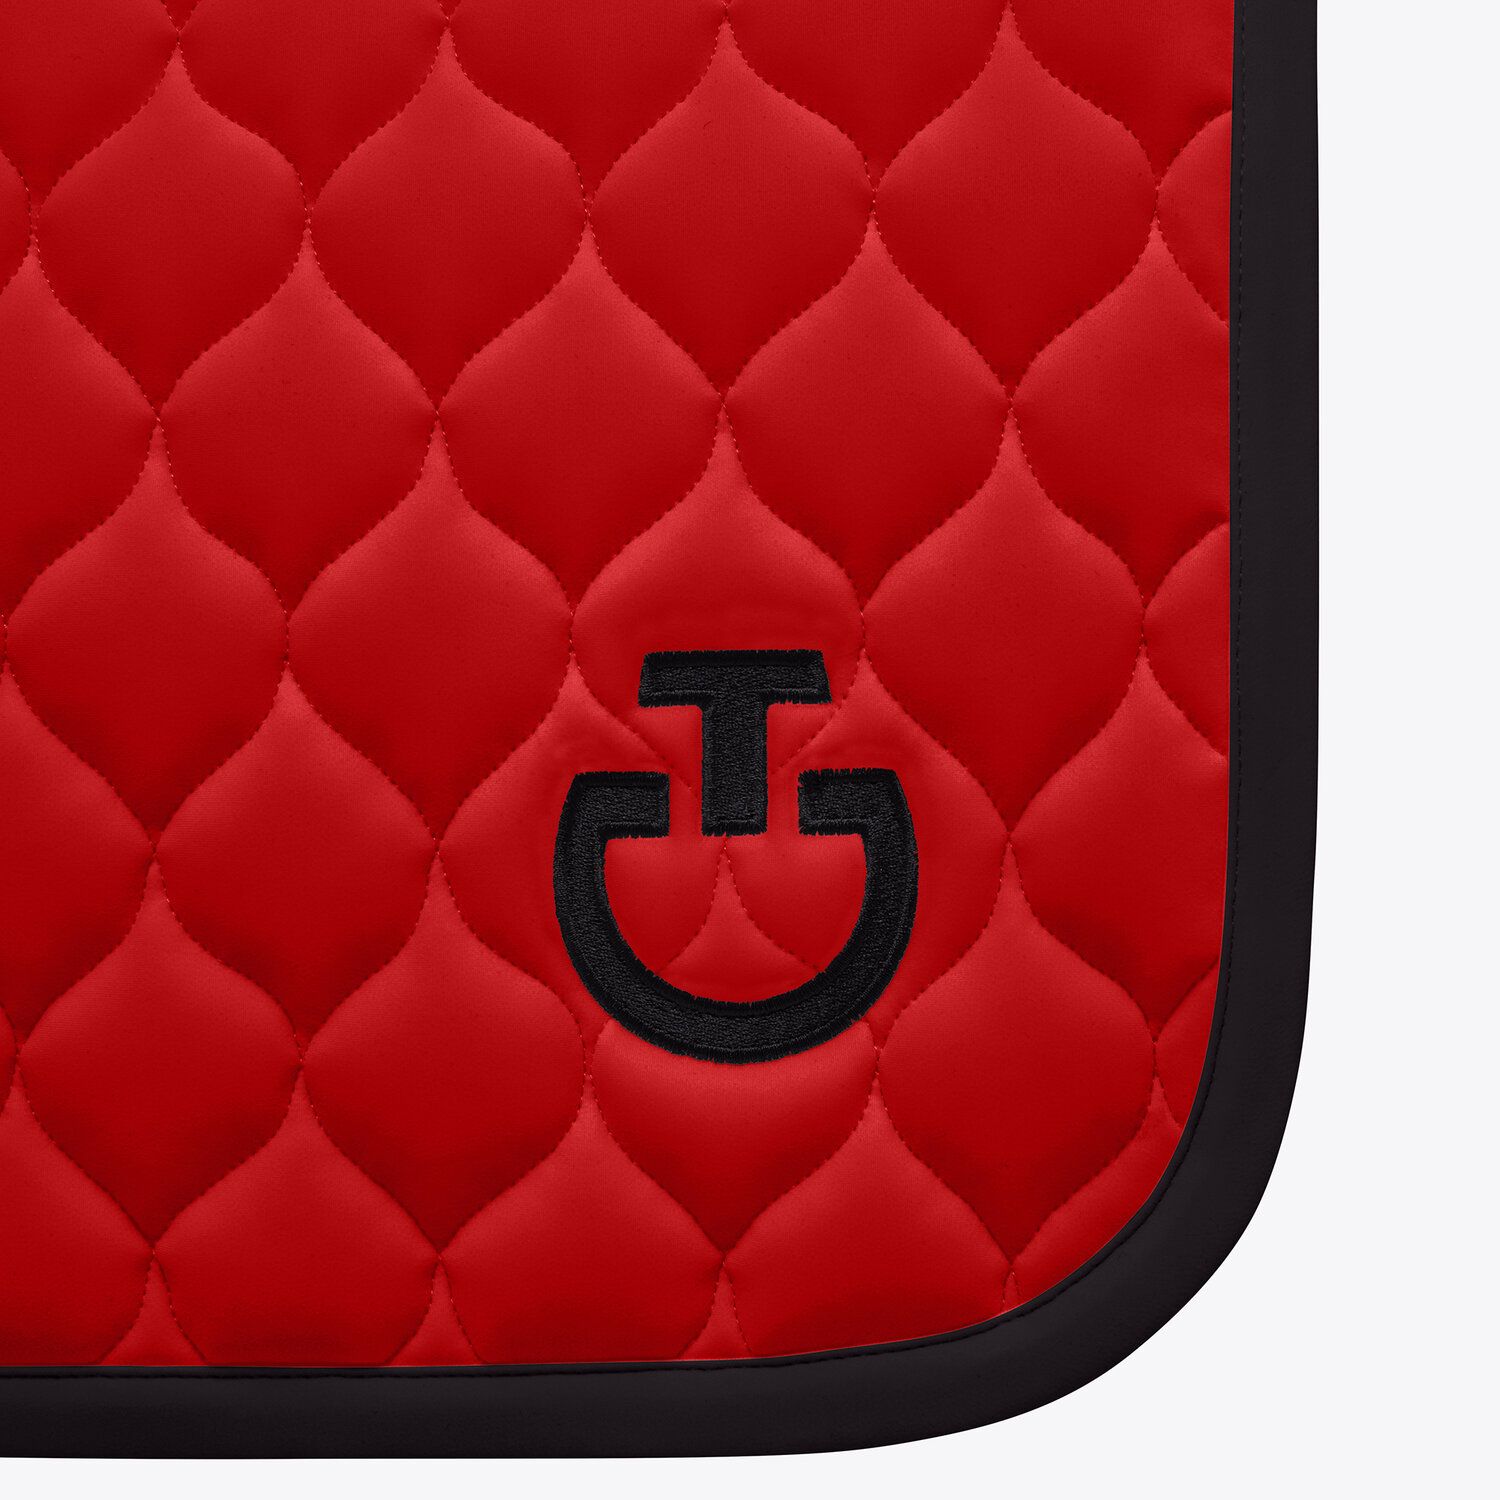 CIRCULAR QUILTED JERSEY DRESSAGE SADDLE PAD RED/BLACK